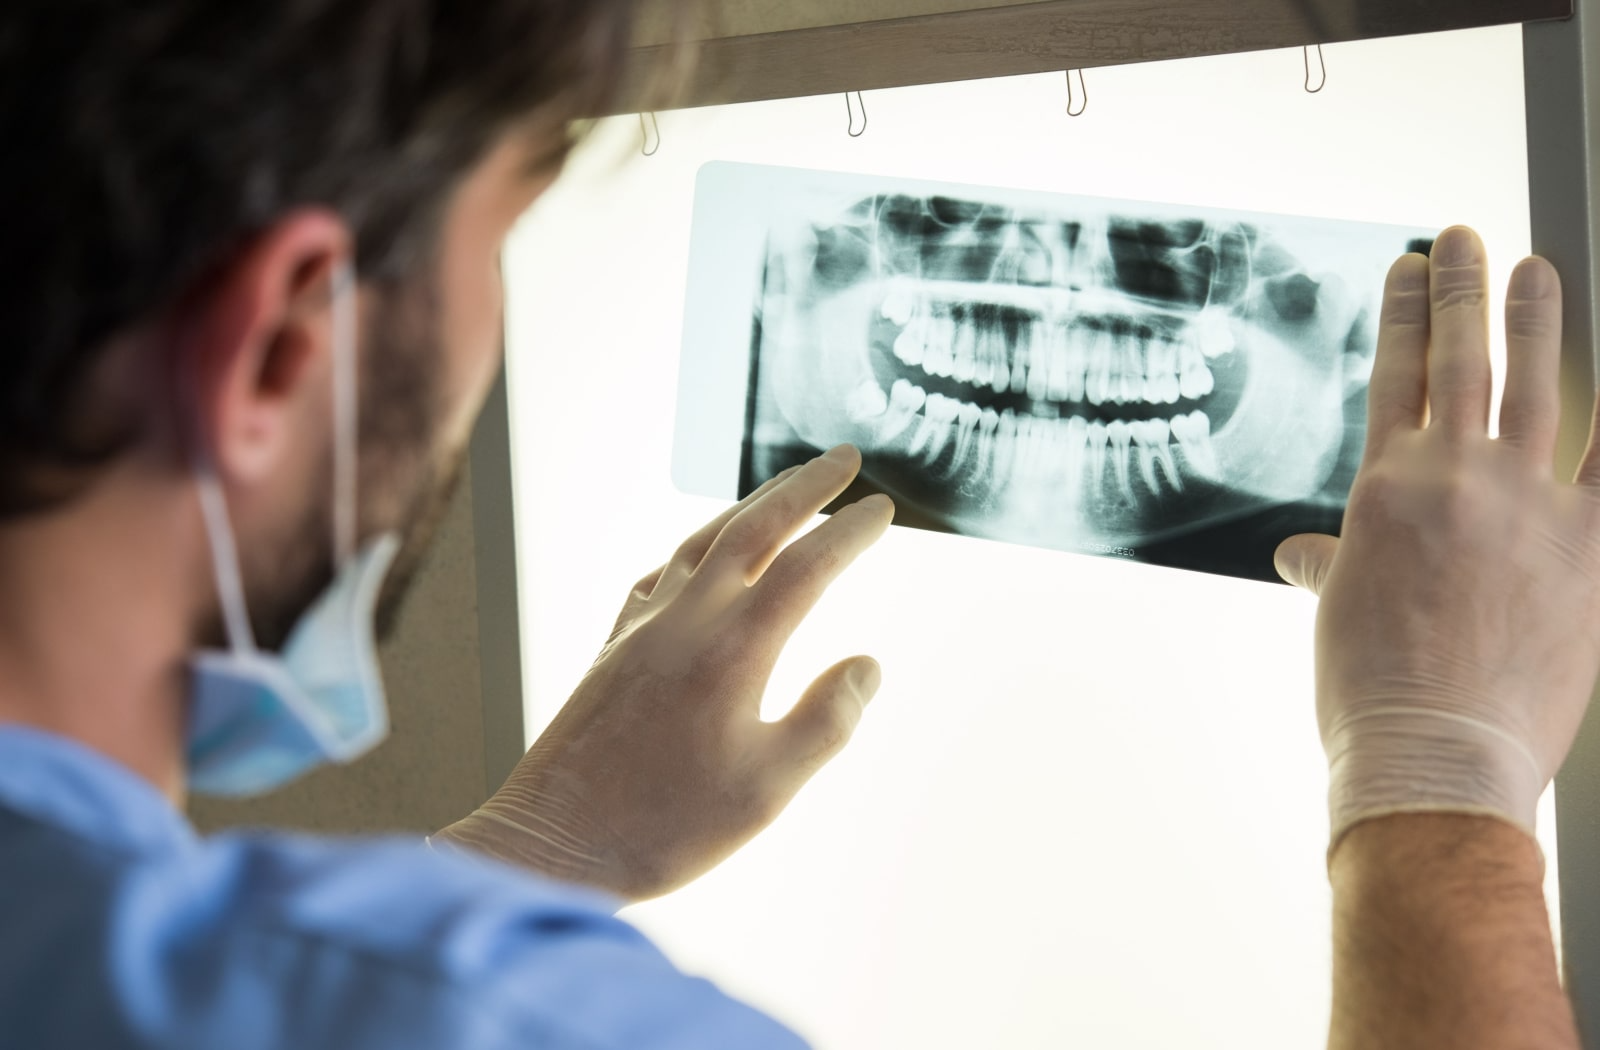 A male dental hygienist looks at a patient's tooth x-ray through the light